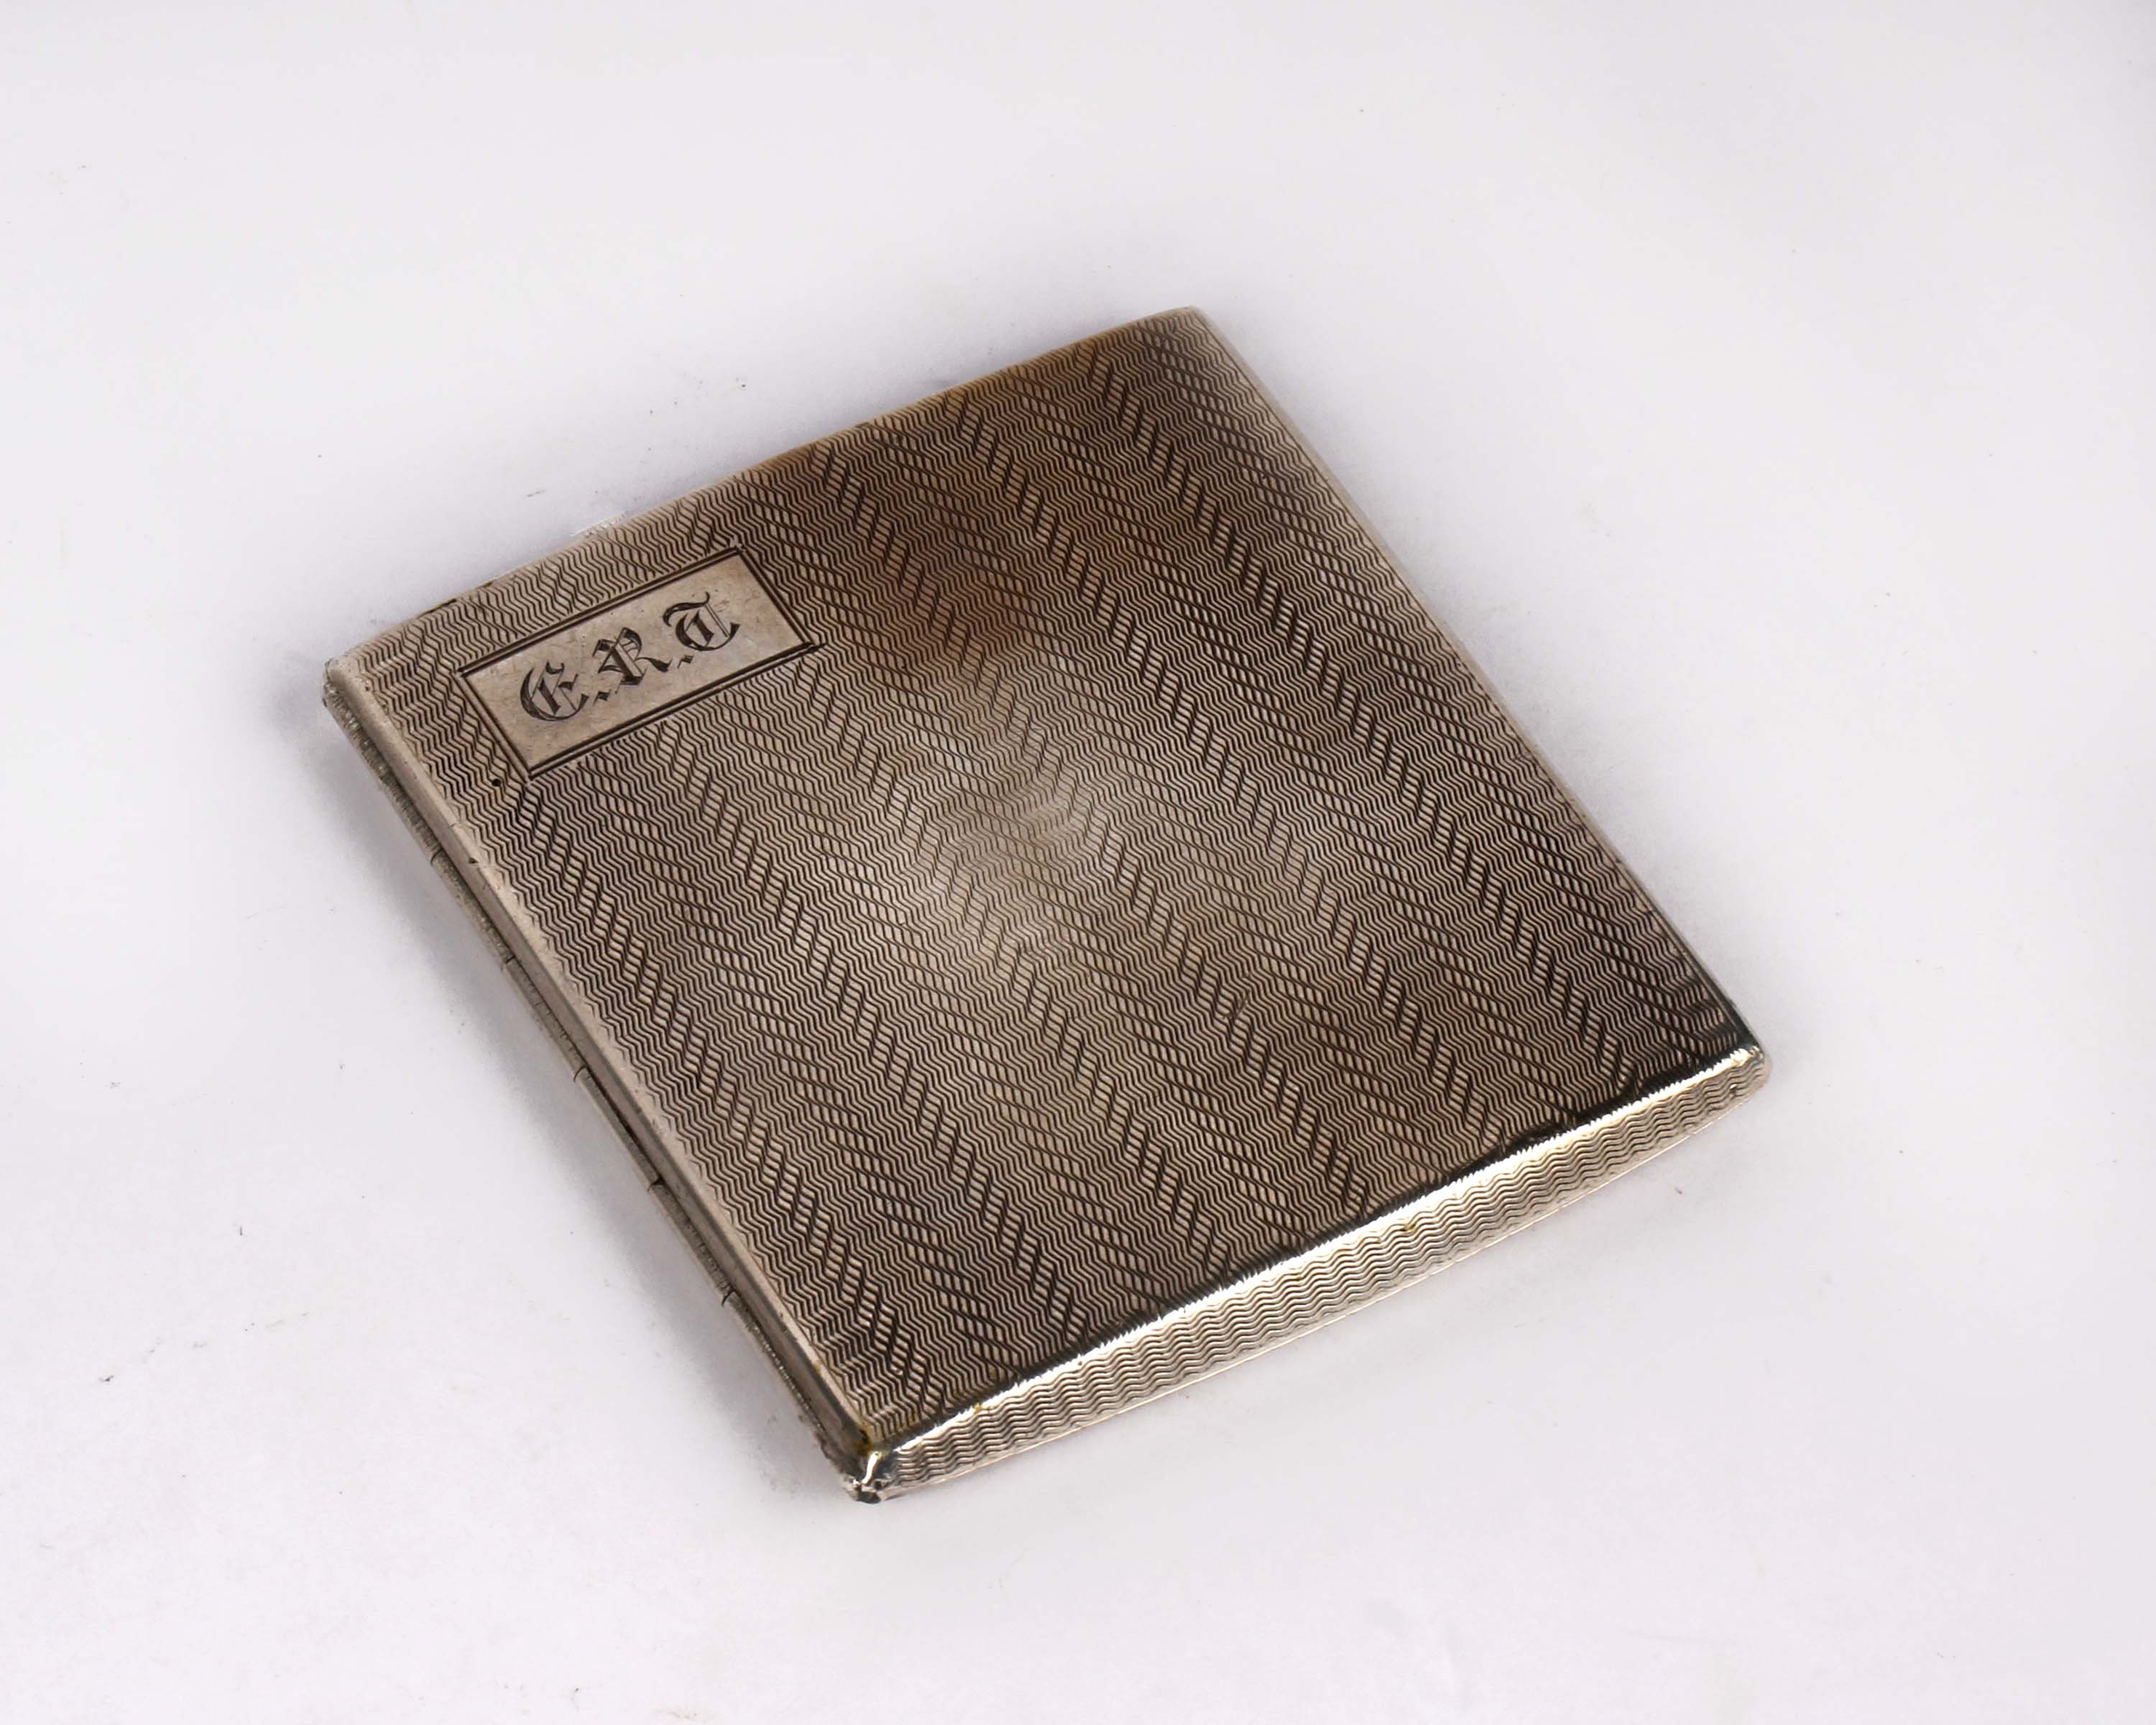 A sterling silver cigarette case with engine turned design by Deakin & Francis Ltd, Birmingham.